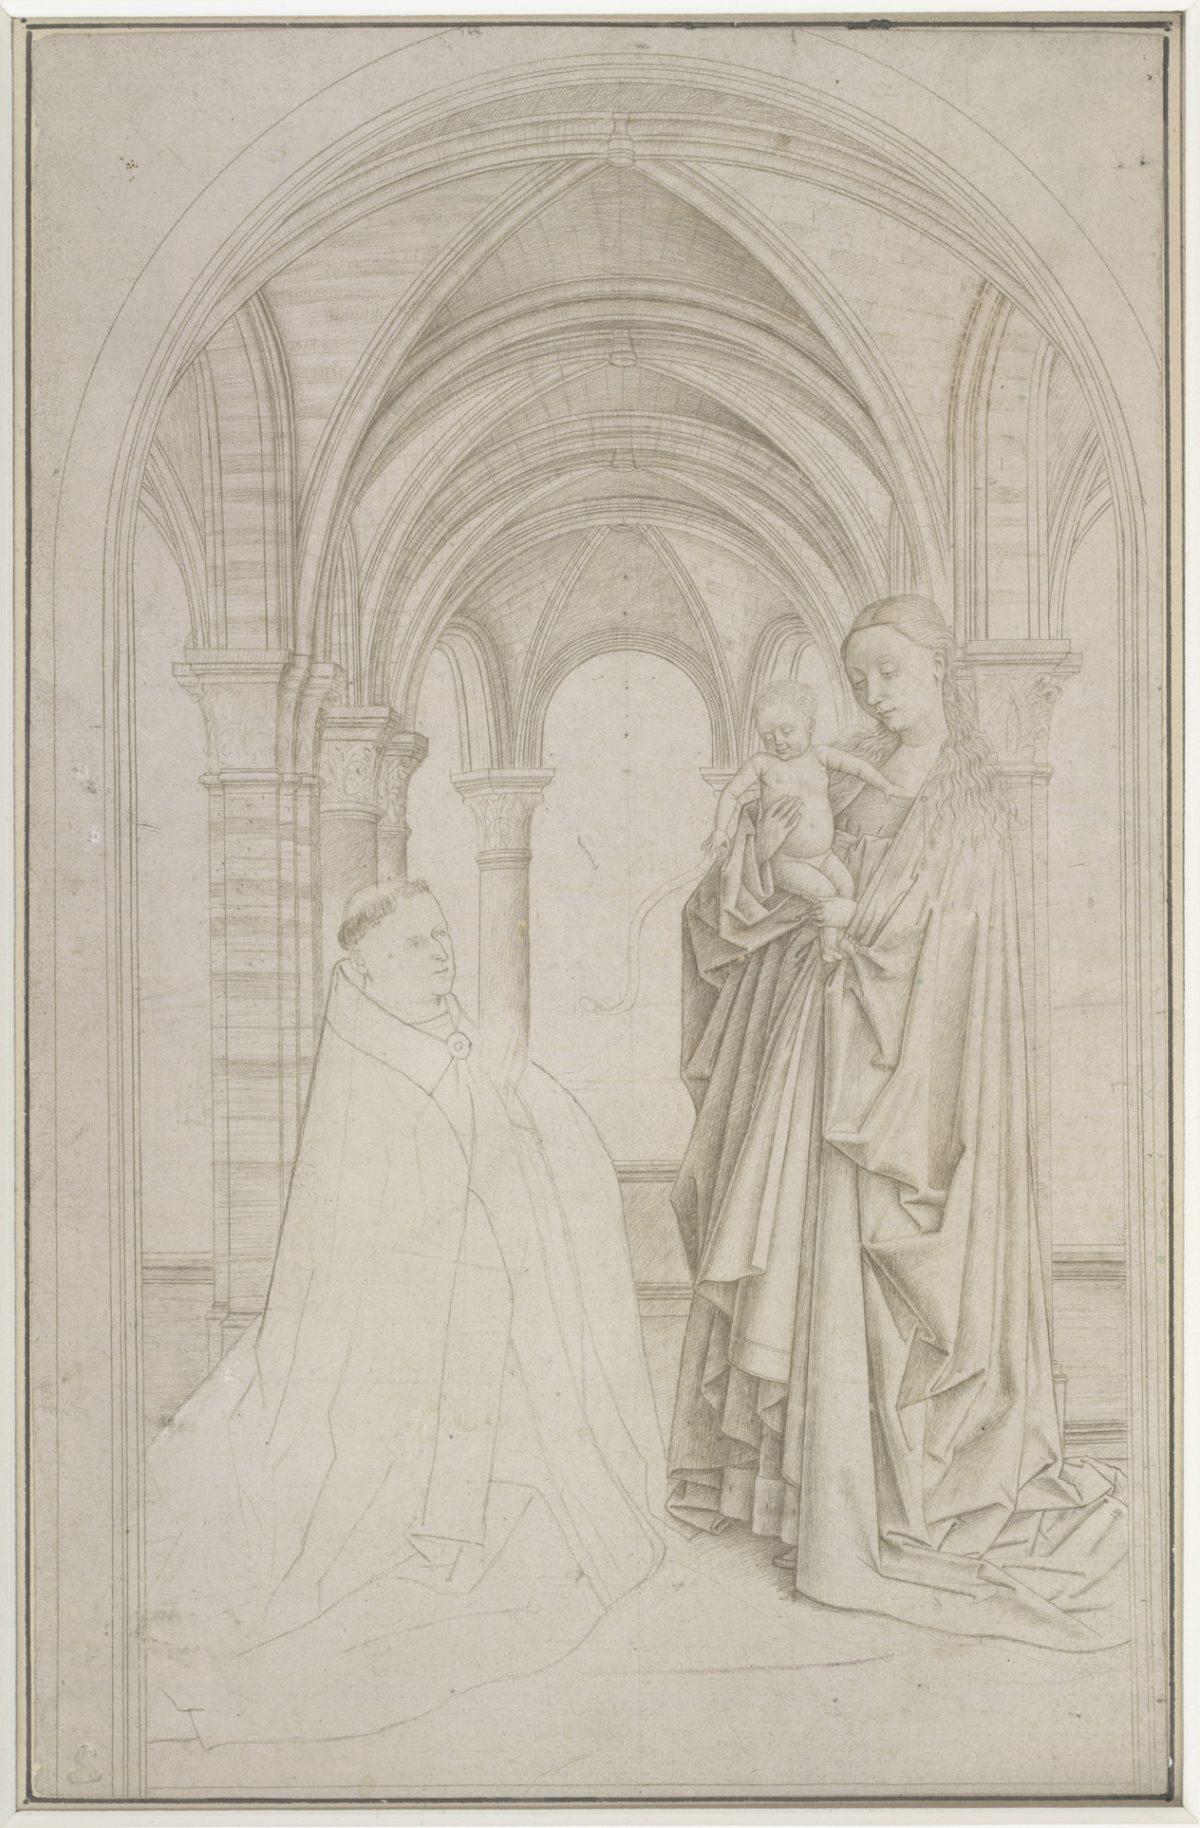 "The Virgin and Child With a Donor" (copy after Jan van Eyck’s "Maelbeke Virgin"), attributed to Petrus Christus. Silverpoint on prepared paper, 10 15/16 inches by 7 1/16 inches. The Albertina Museum, Vienna. (The Frick Collection)